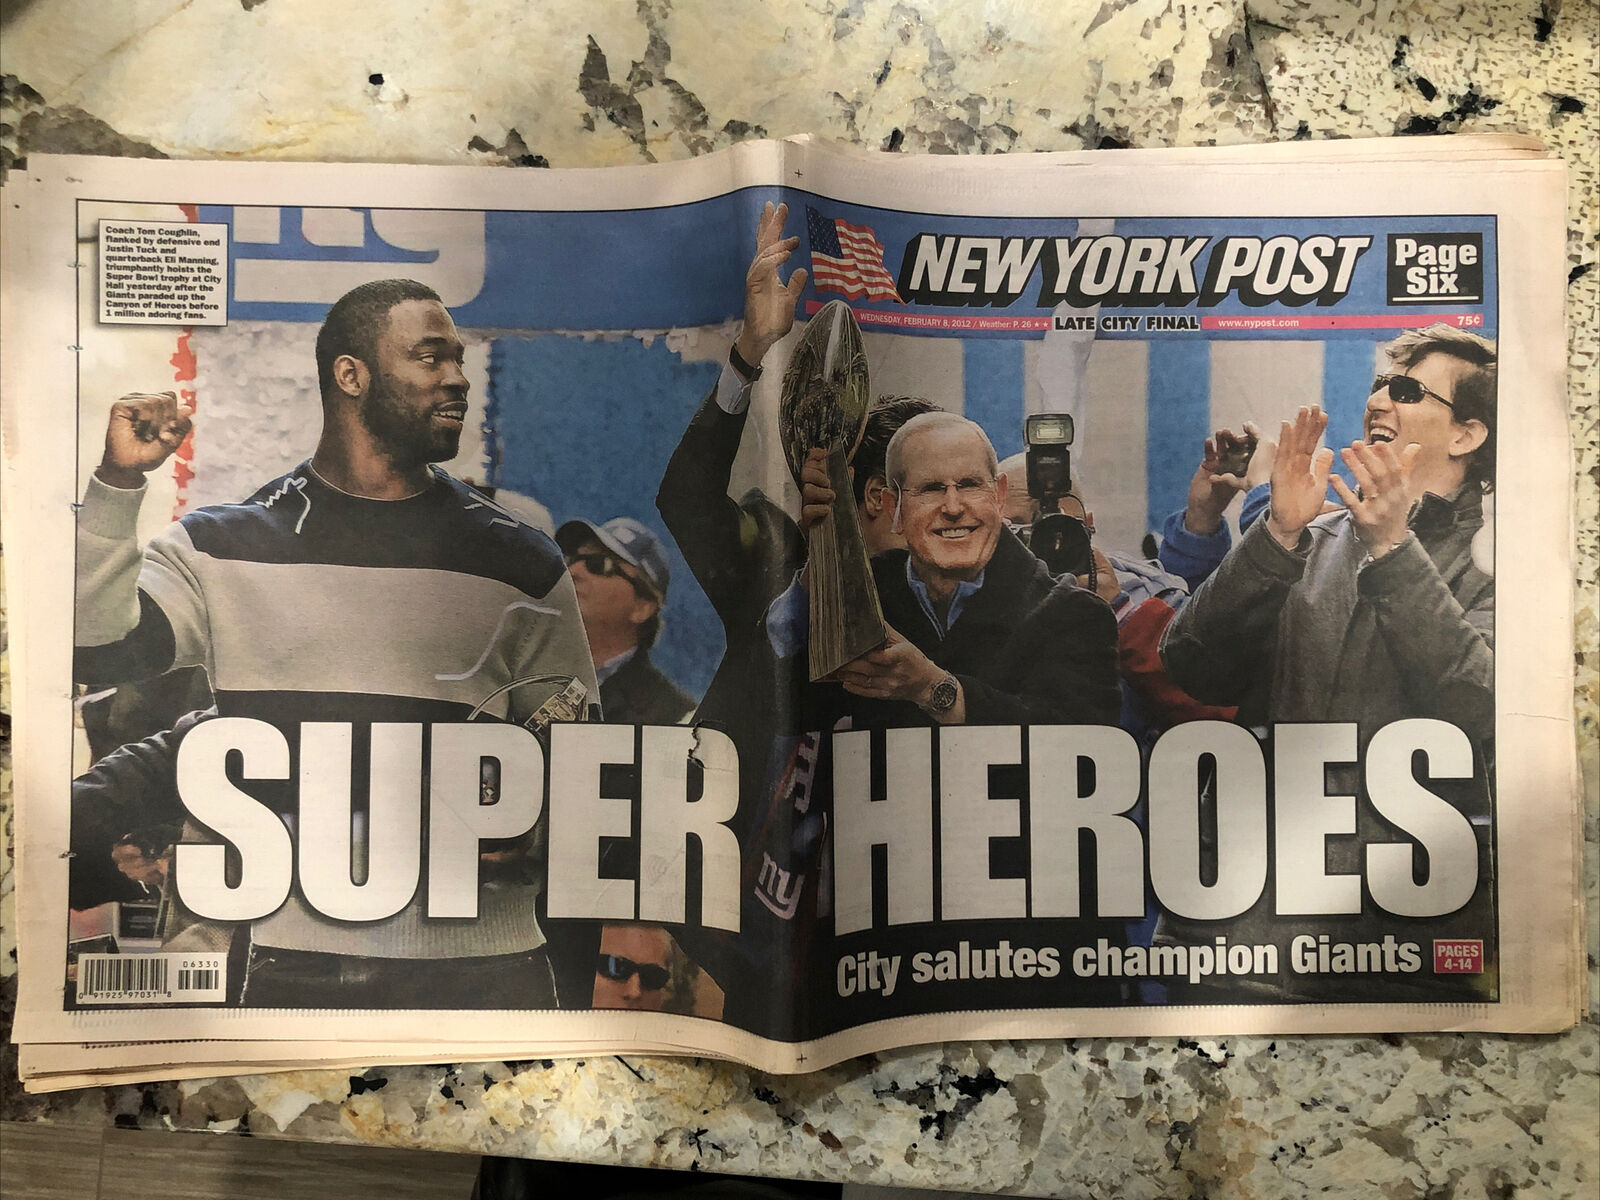 NY Post Feb 8, 2012 - Super Heroes - Champion Giants (*Little Rip On Letter R*)